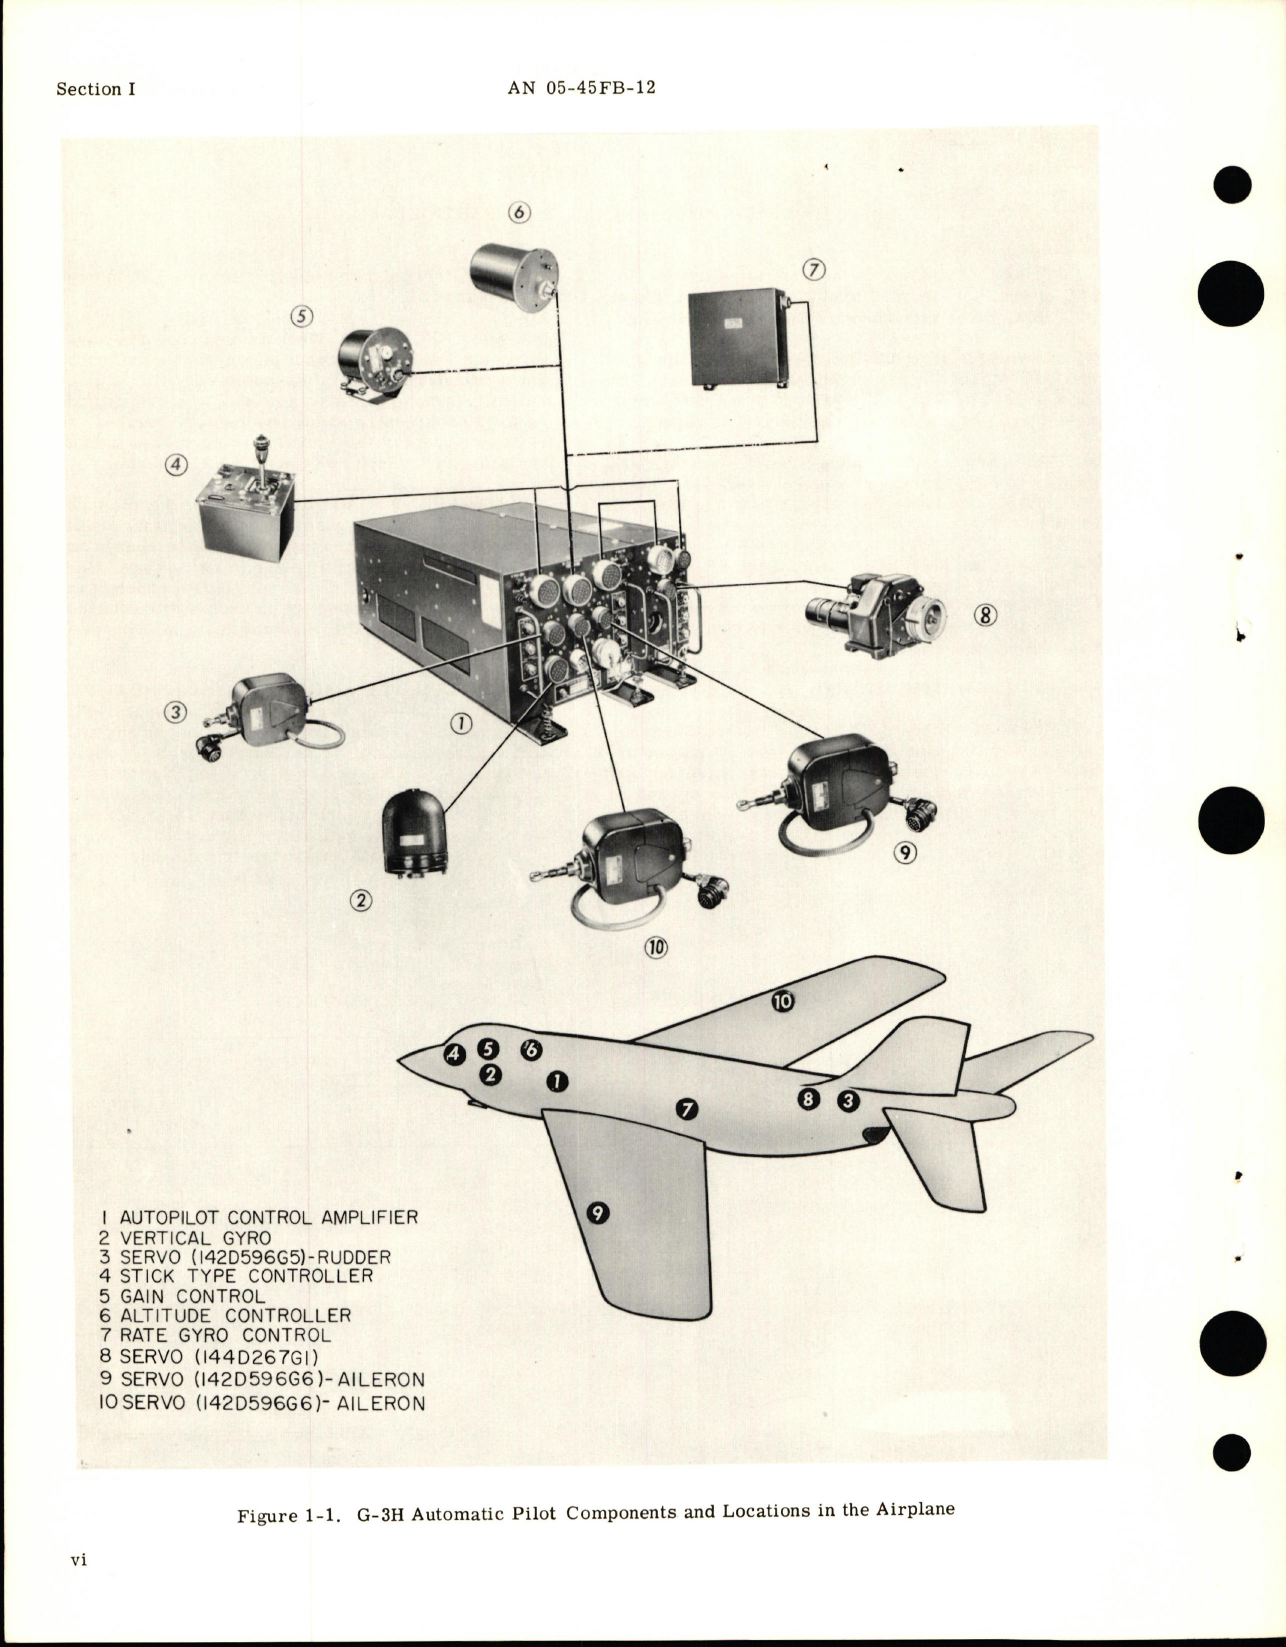 Sample page 8 from AirCorps Library document: Operation and Service Instructions for G-3H Automatic Pilot - Model 2CJ4D1 